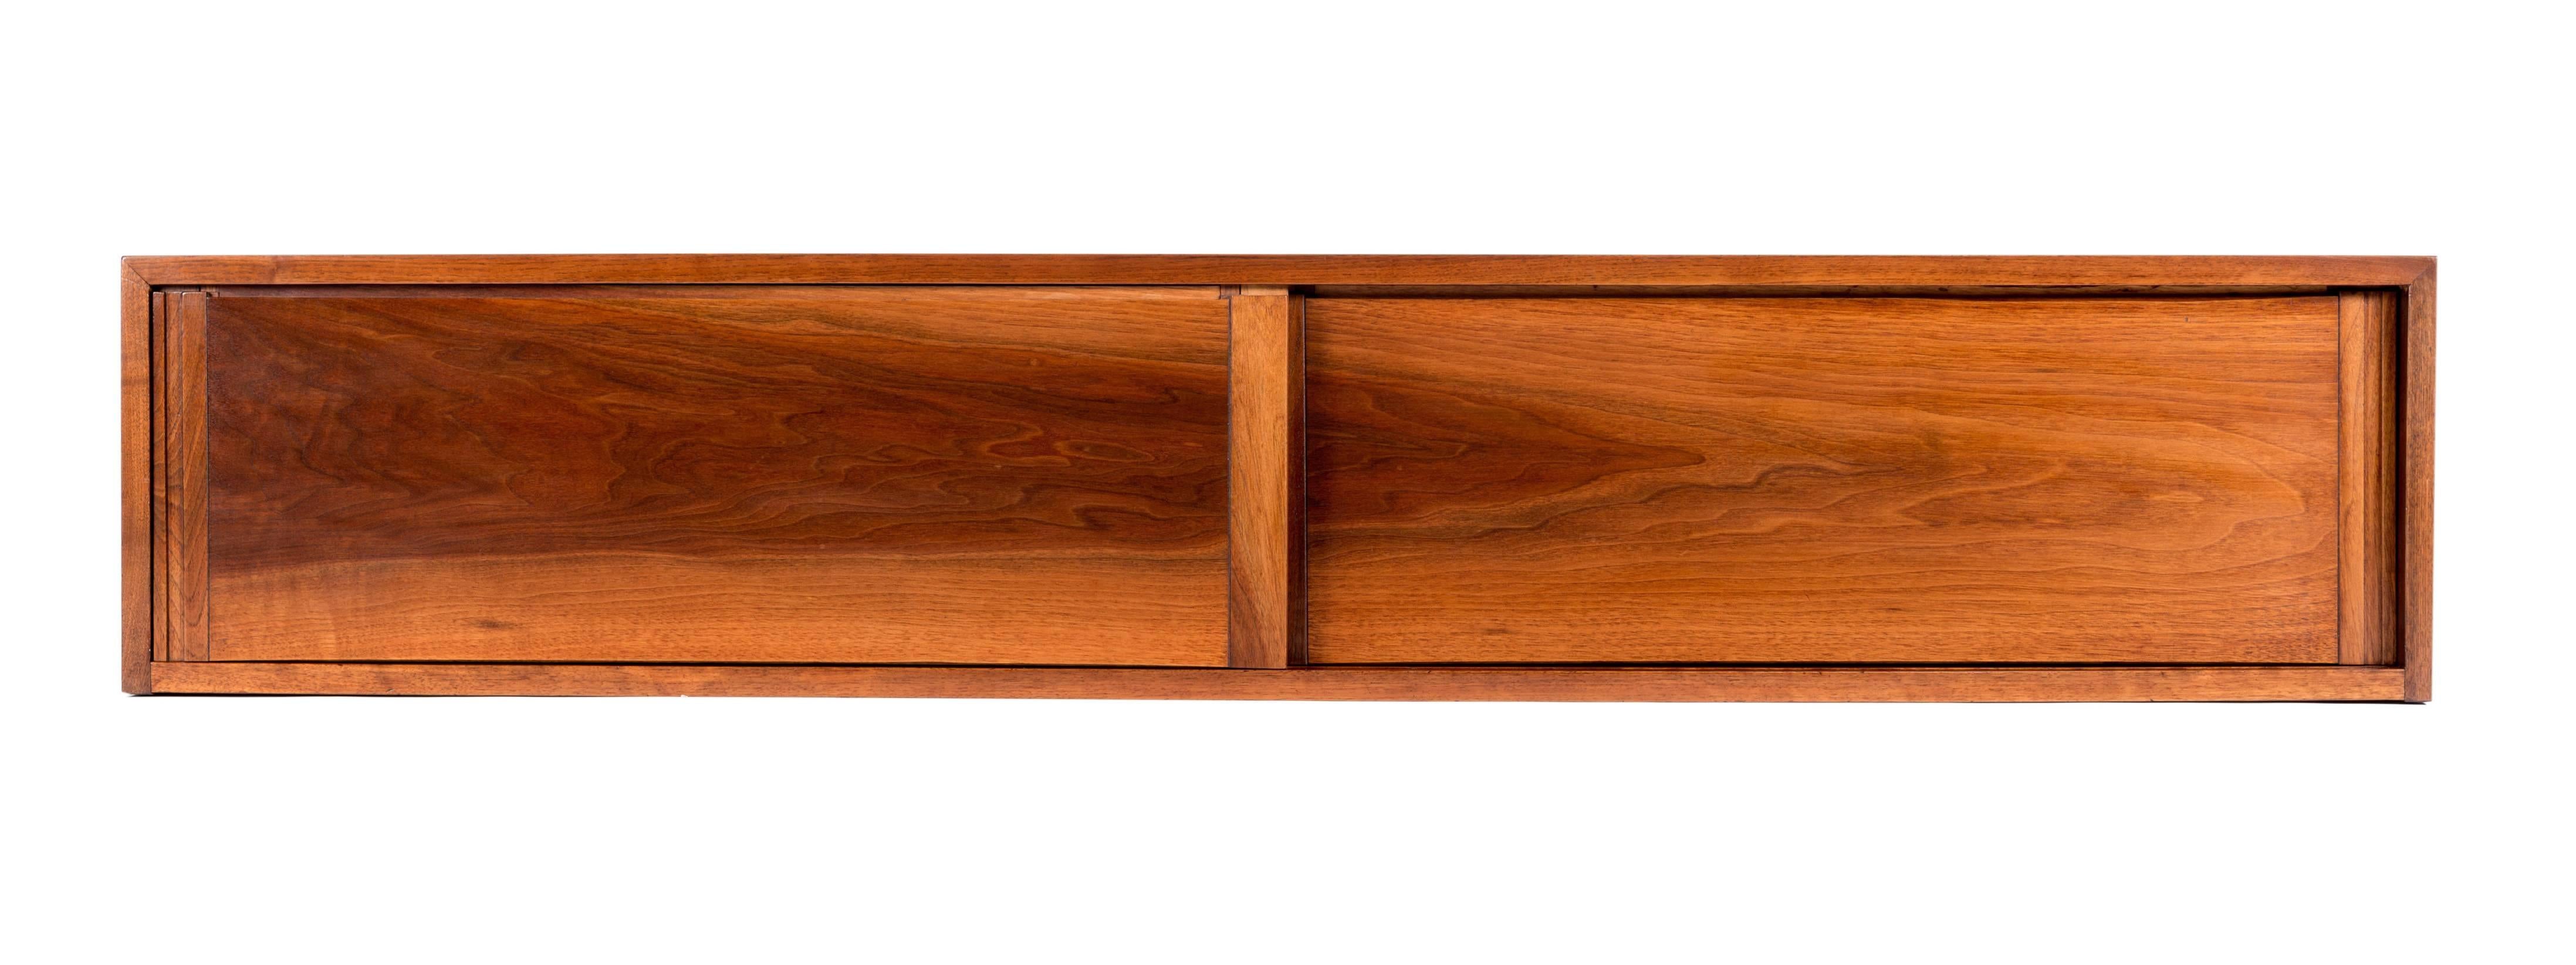 Attractive 5 ft. walnut wall-mounted cabinet by George Nakashima. Cabinet features two sliding doors and dove-tailed top. Cabinet with provenance.